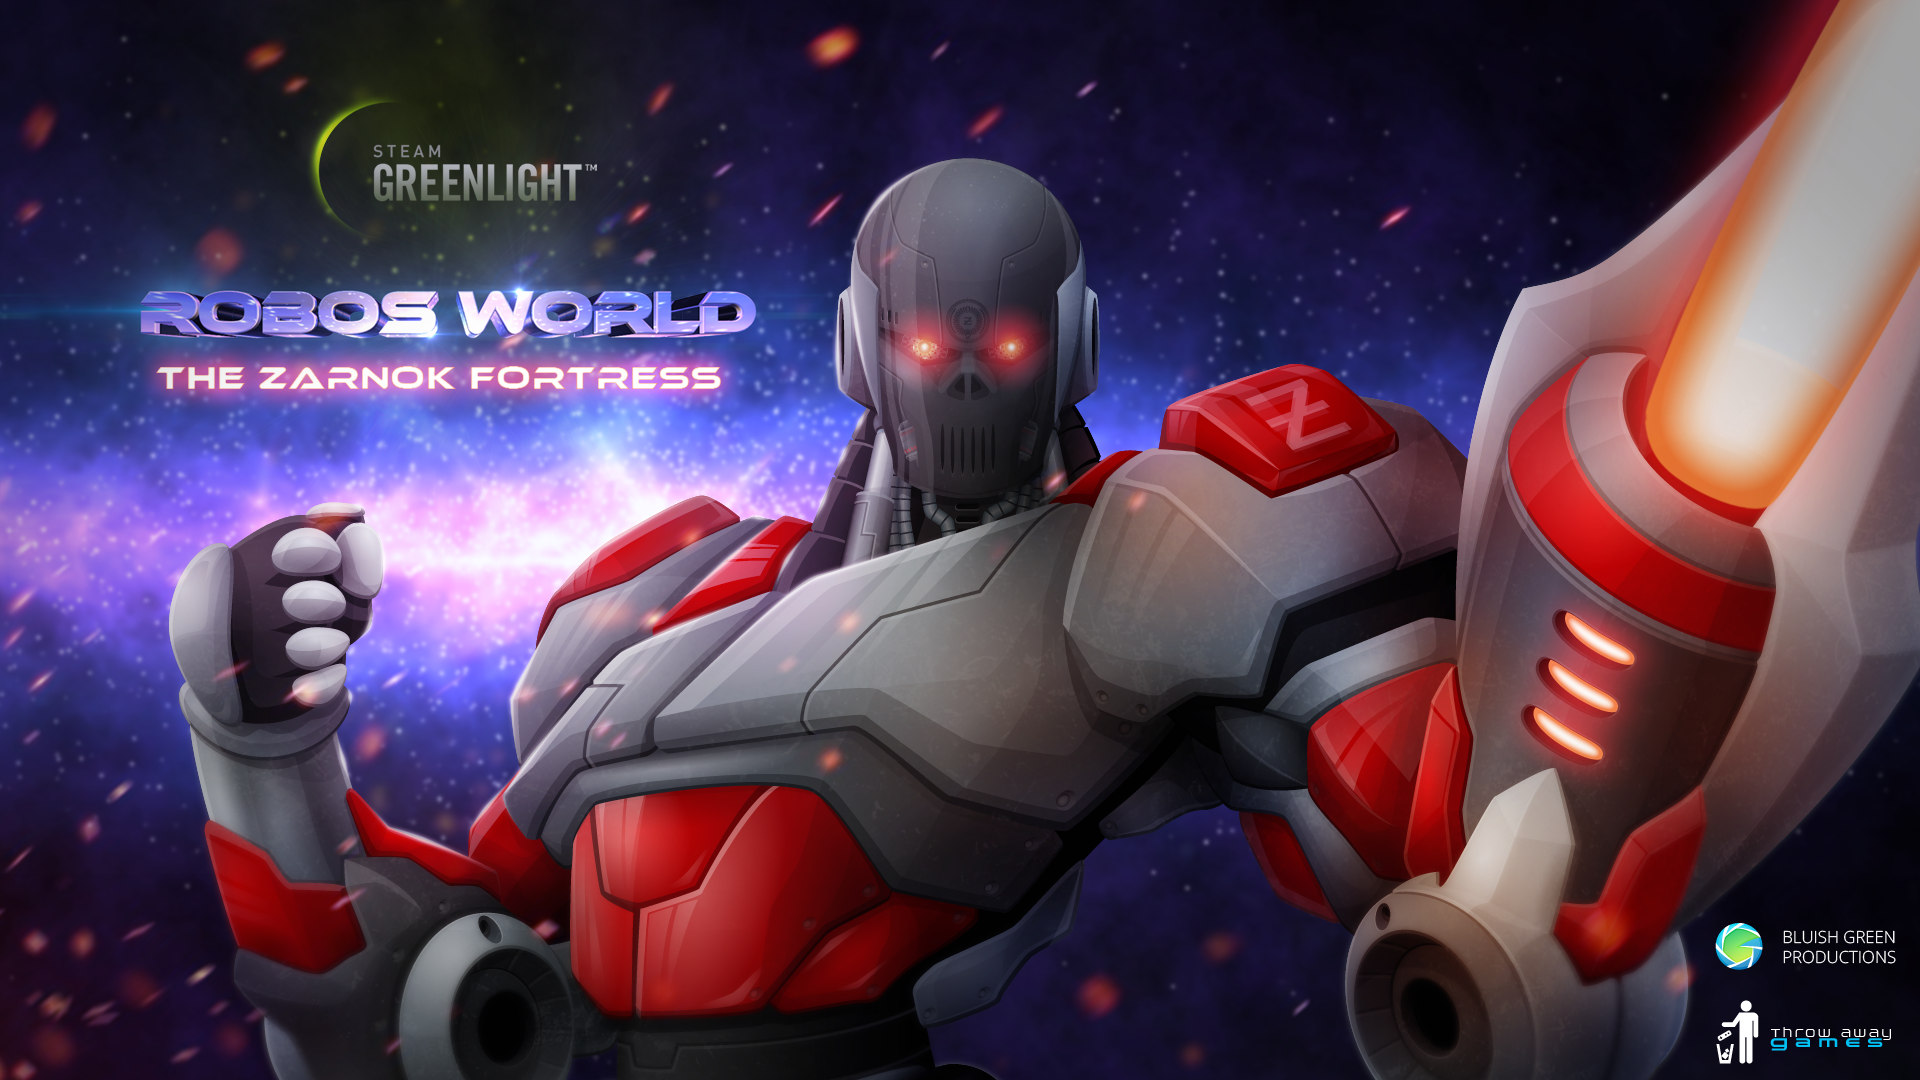 Vote YES for Zarnok Fortress on Steam!